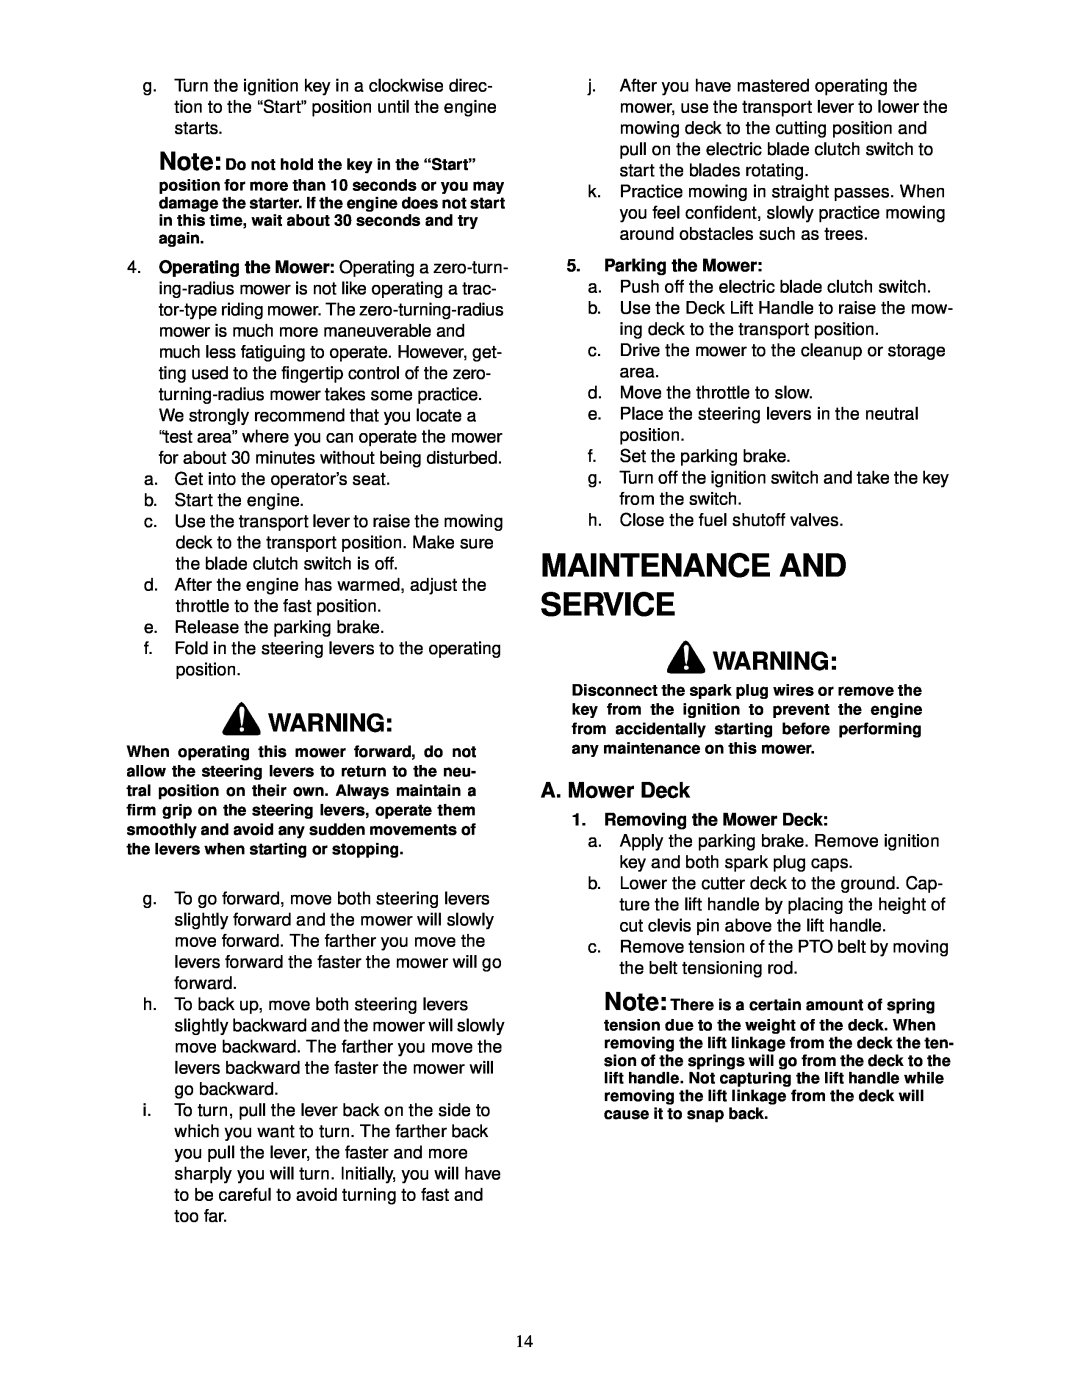 Cub Cadet 60-inch & 72-inch Fabricated Deck service manual Maintenance And Service, A. Mower Deck, Parking the Mower 